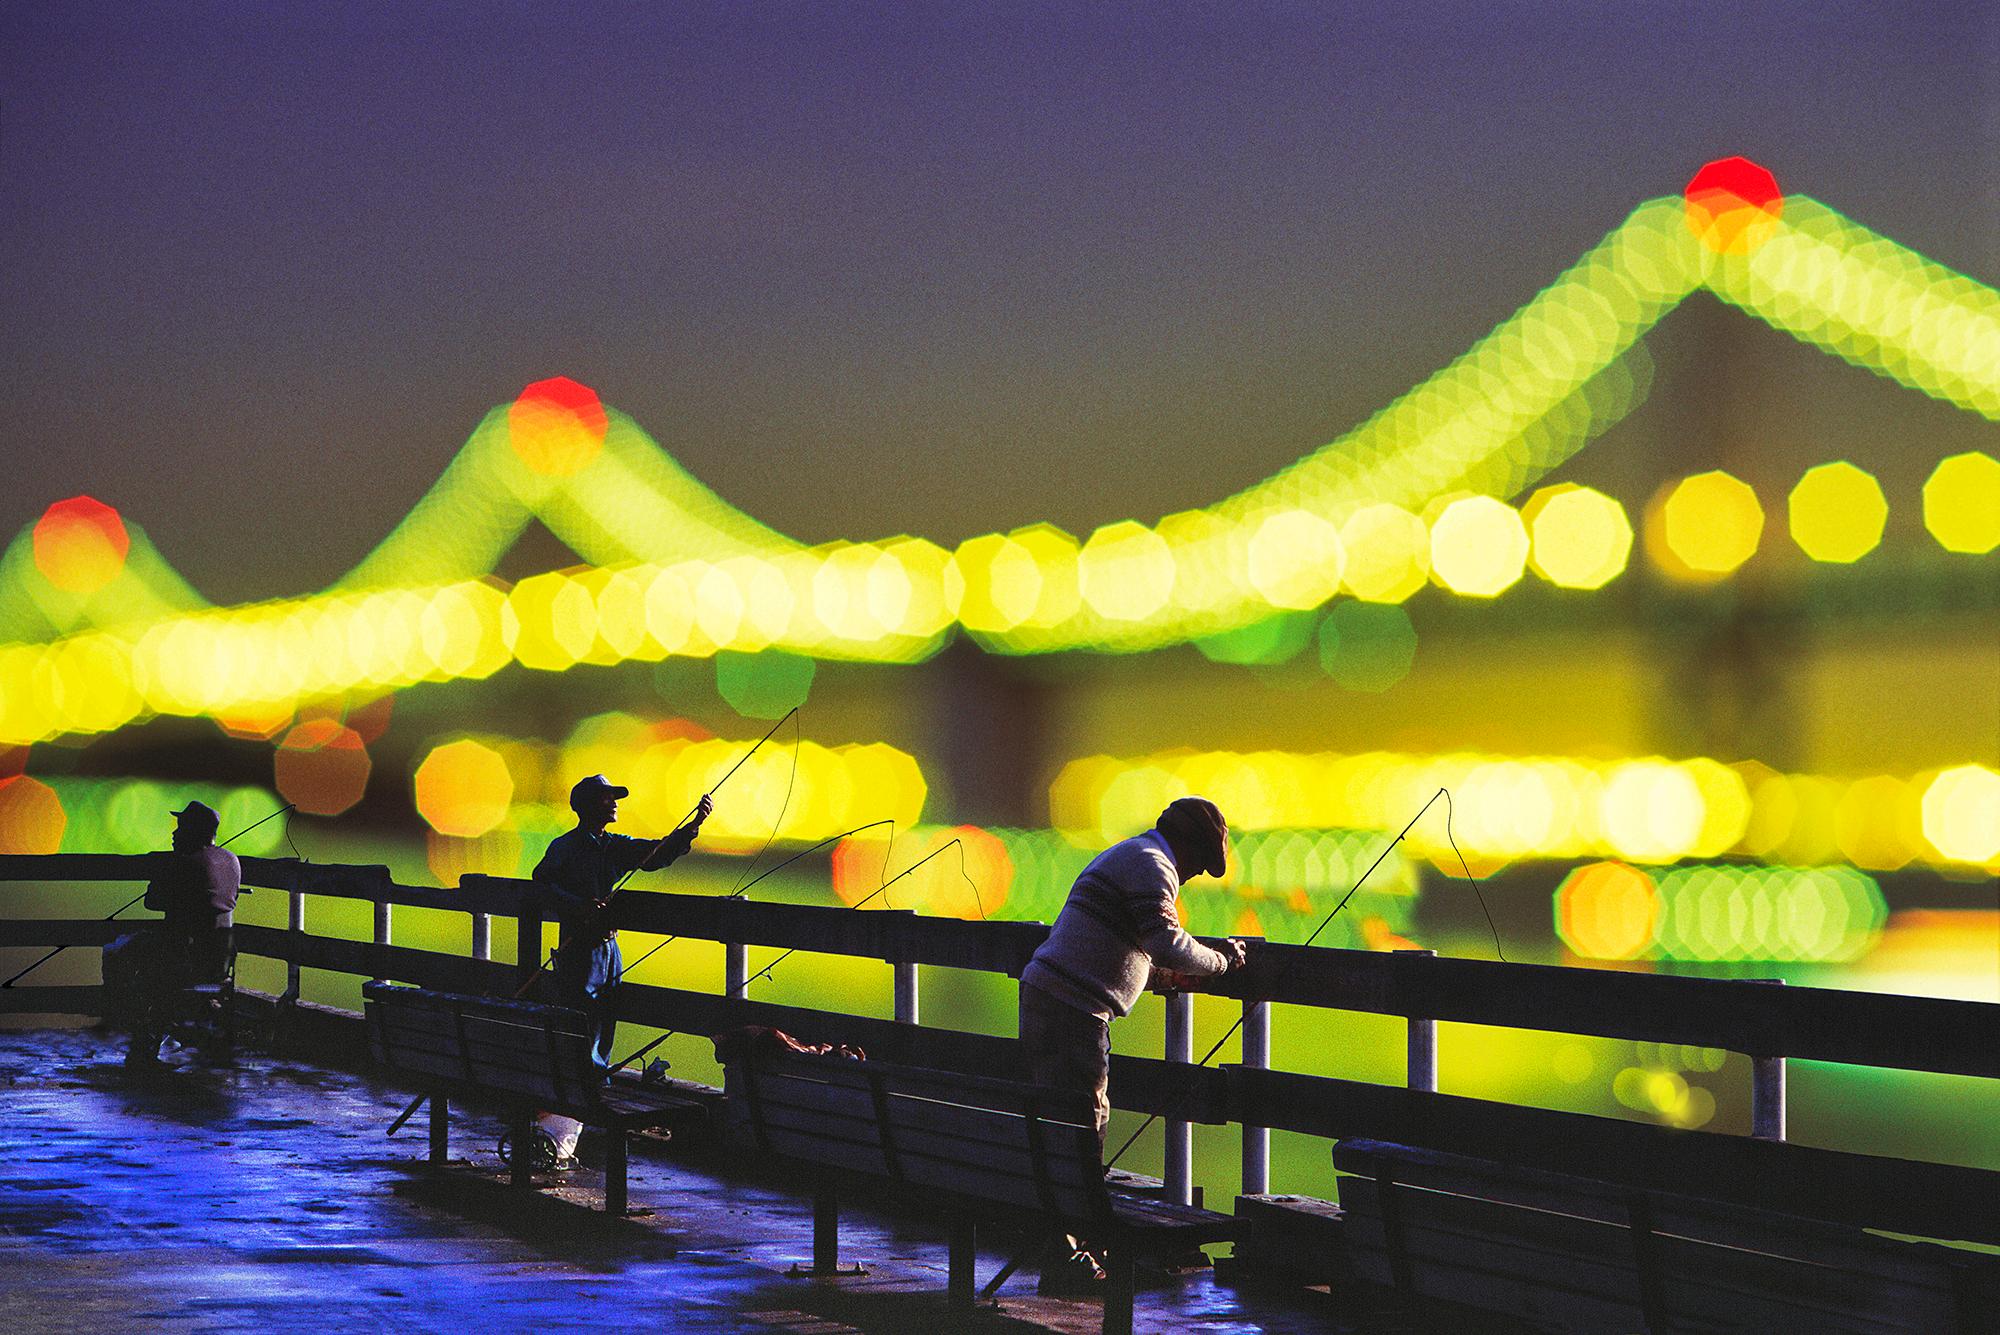 We Are All Fisherman.   Figures and Out of Focus Lights San Francisco Bay Bridge